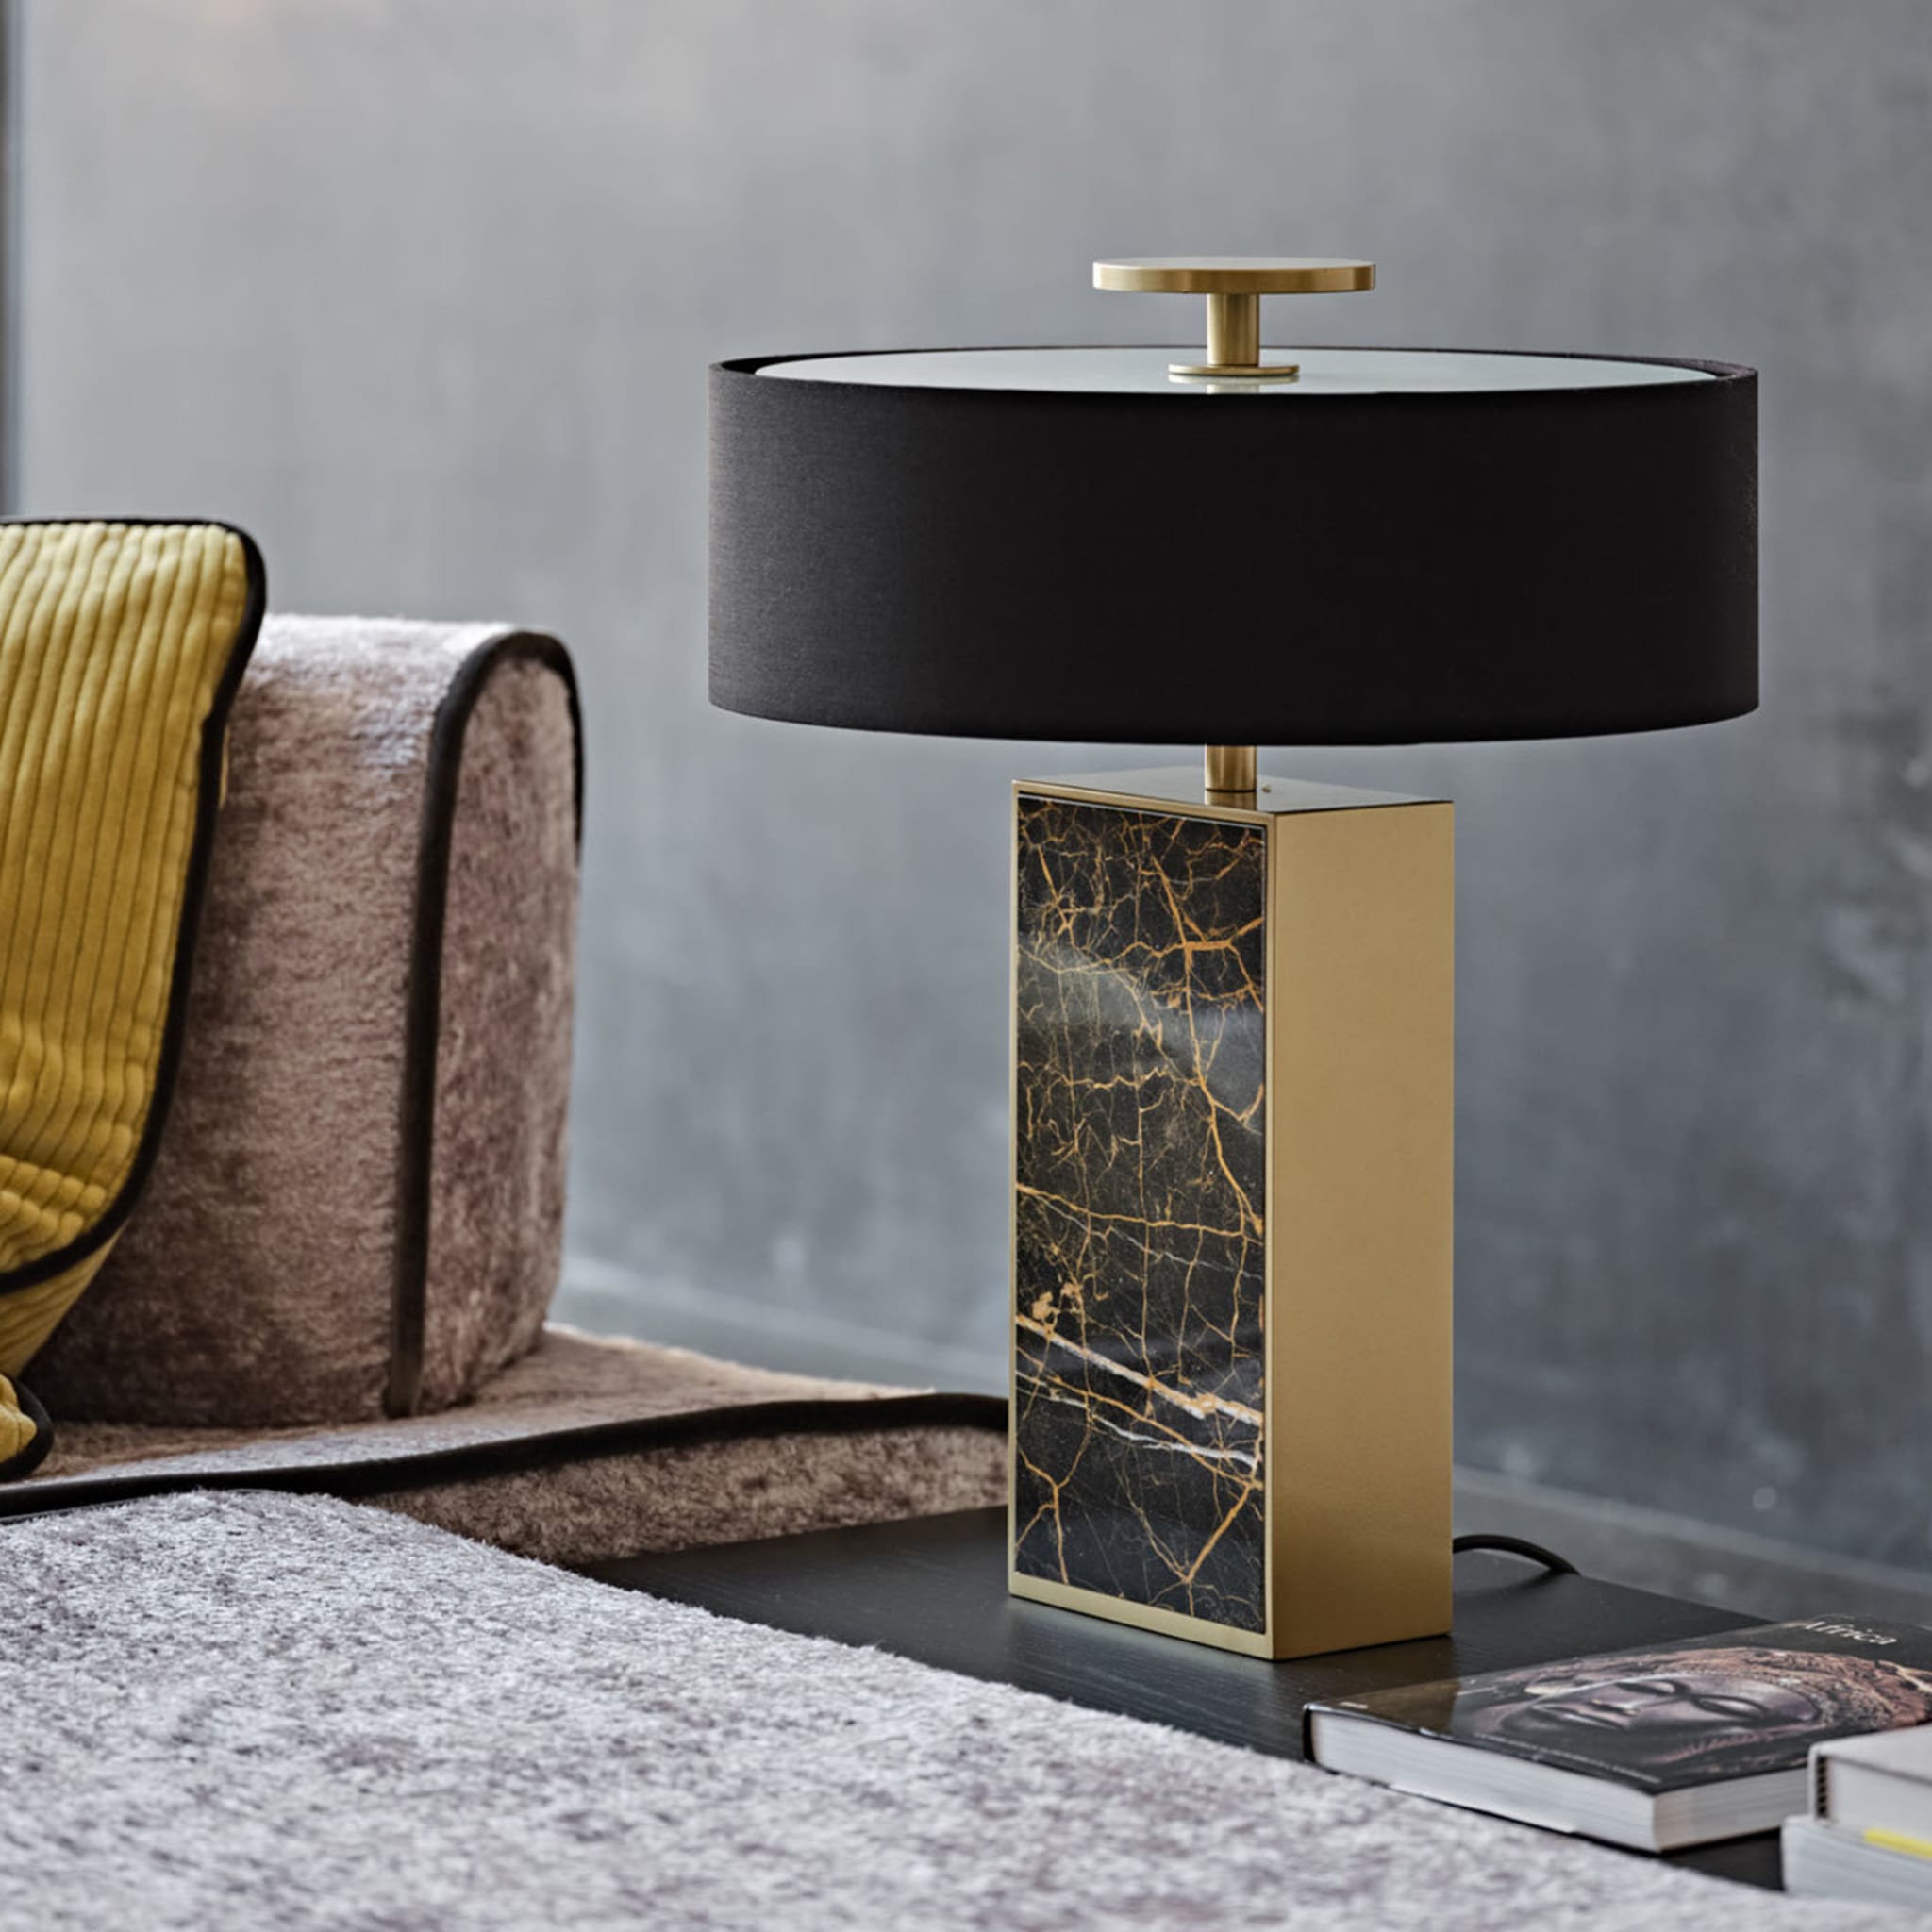 Thelma Couture Table Lamp - Alternative view 3